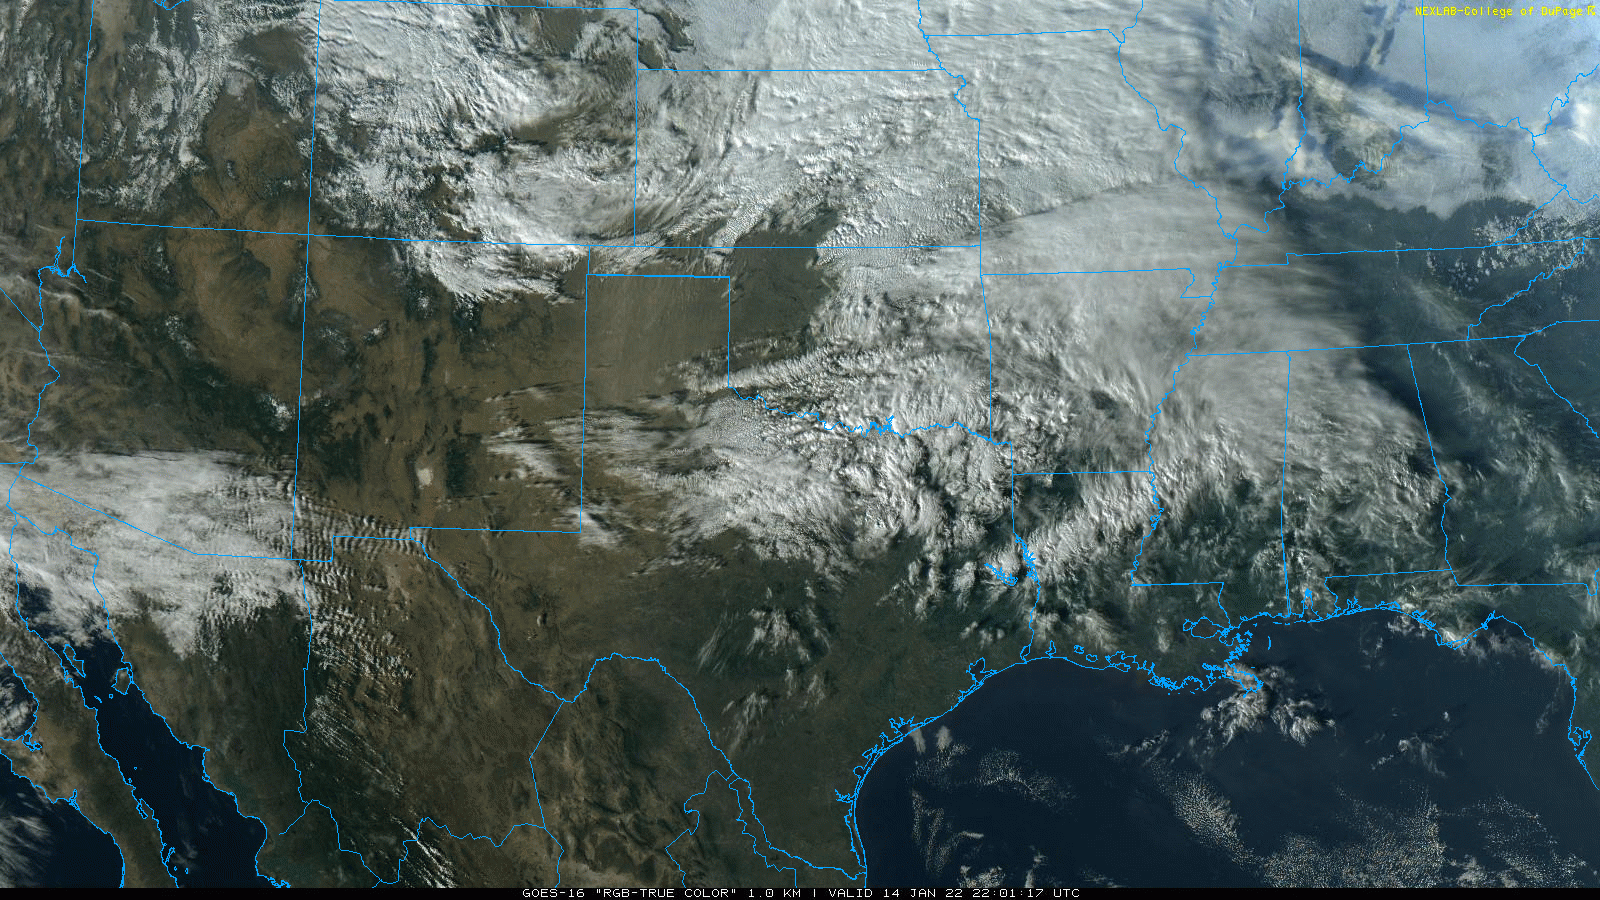 True Color satellite loop valid from 4:01 pm to 5:01 pm on 14 January 2022. Dust can clearly be seen spreading southward from the Texas Panhandle.